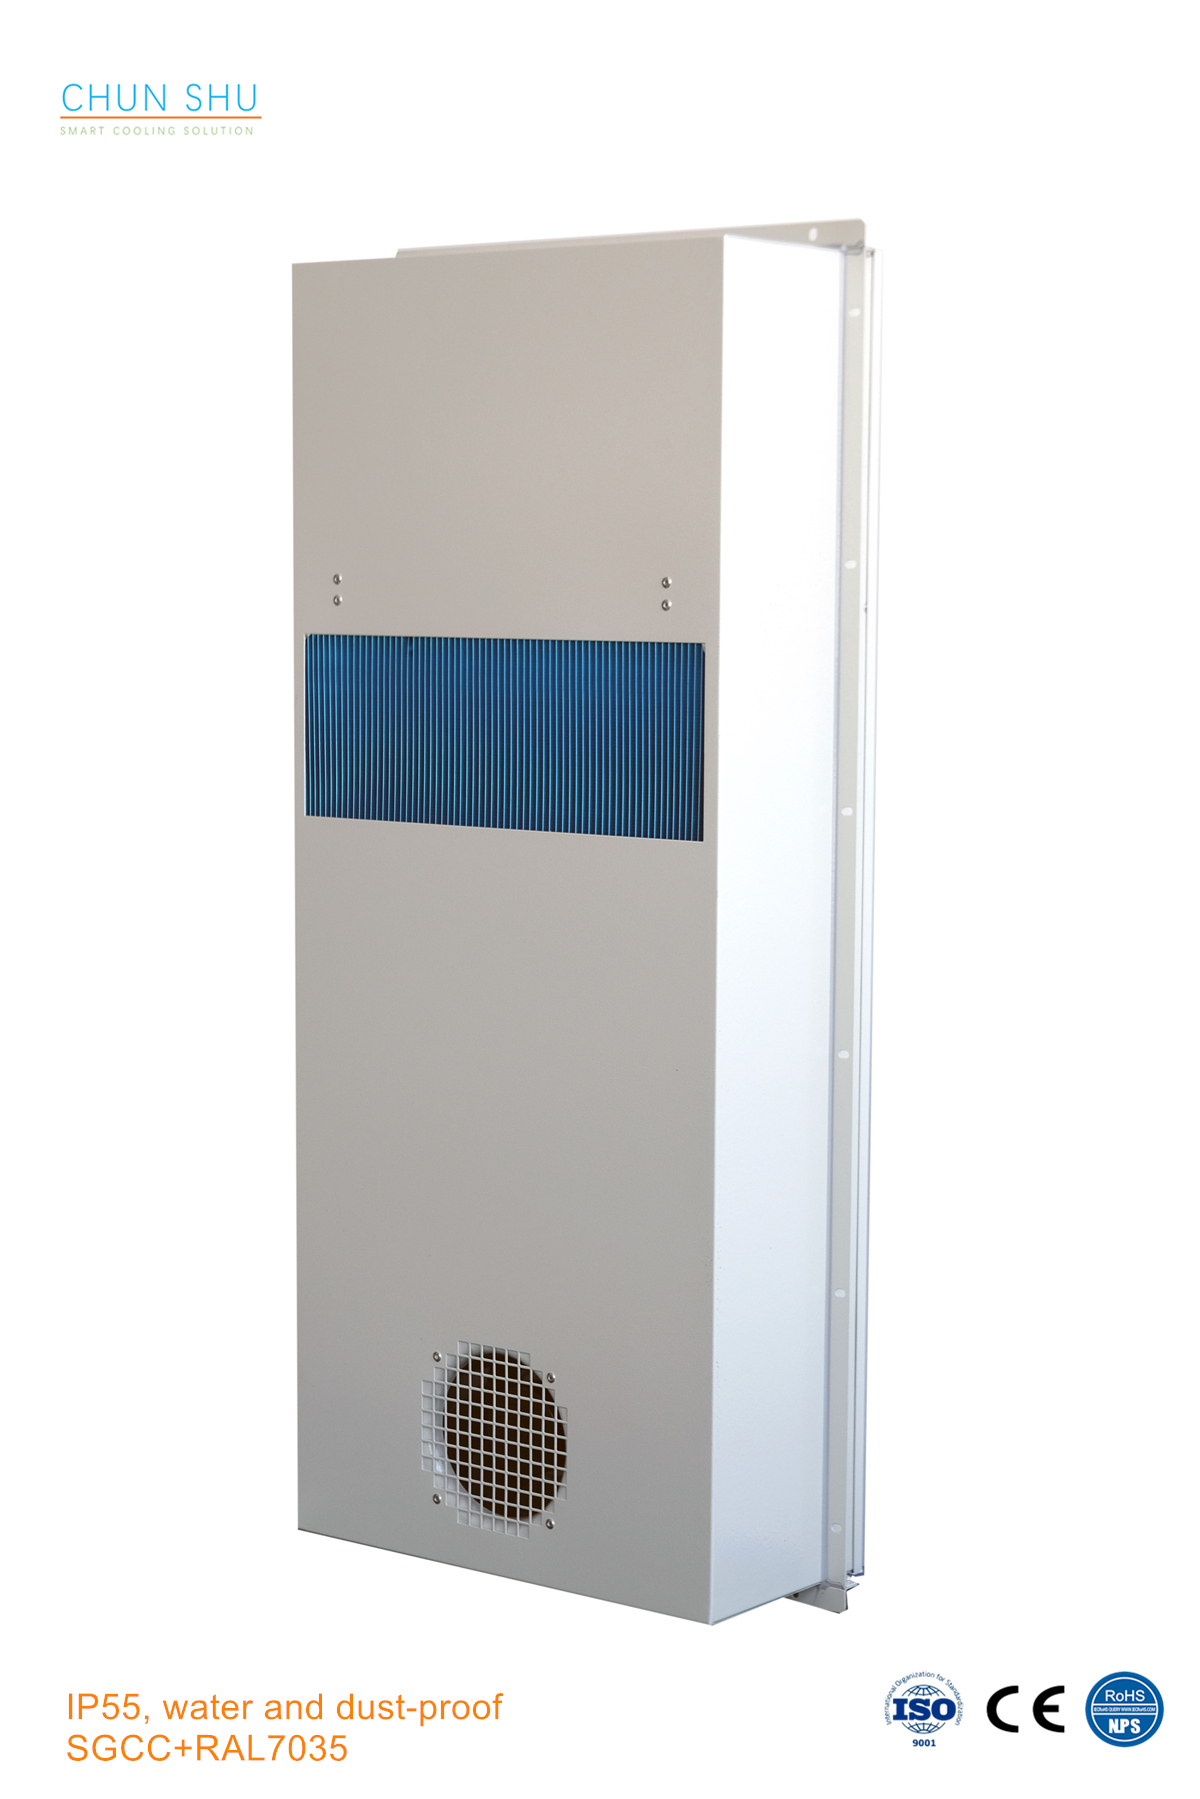 100W/K DC Powered Telecom Cabinet Heat Exchanger,enclosure Cooling,Outdoor Cabinet Refrigeration Equipment